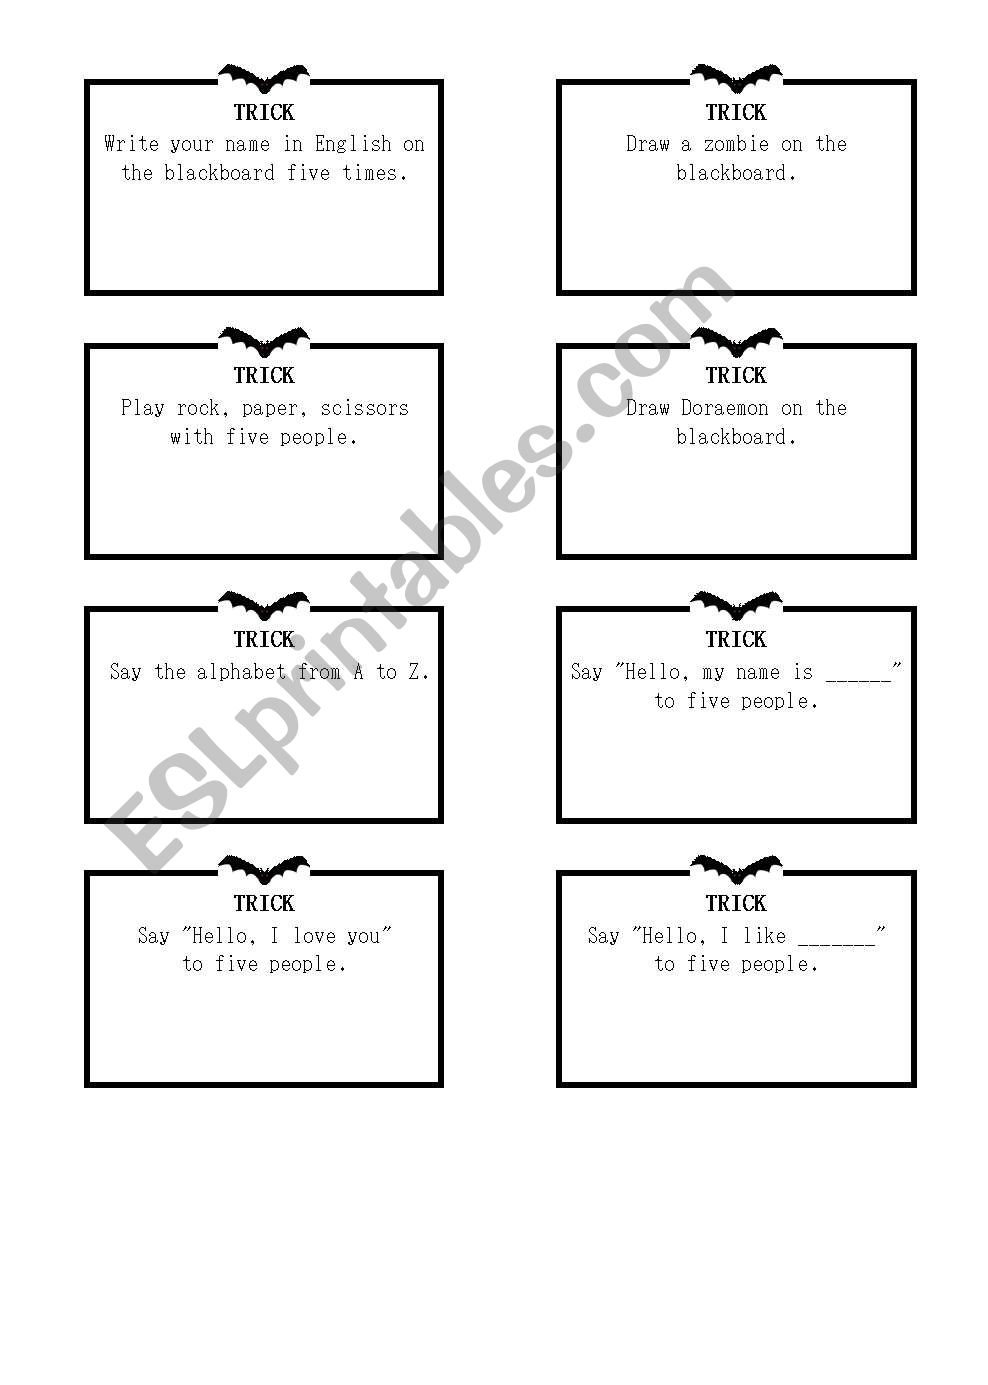 Tricks and Treats Cards worksheet